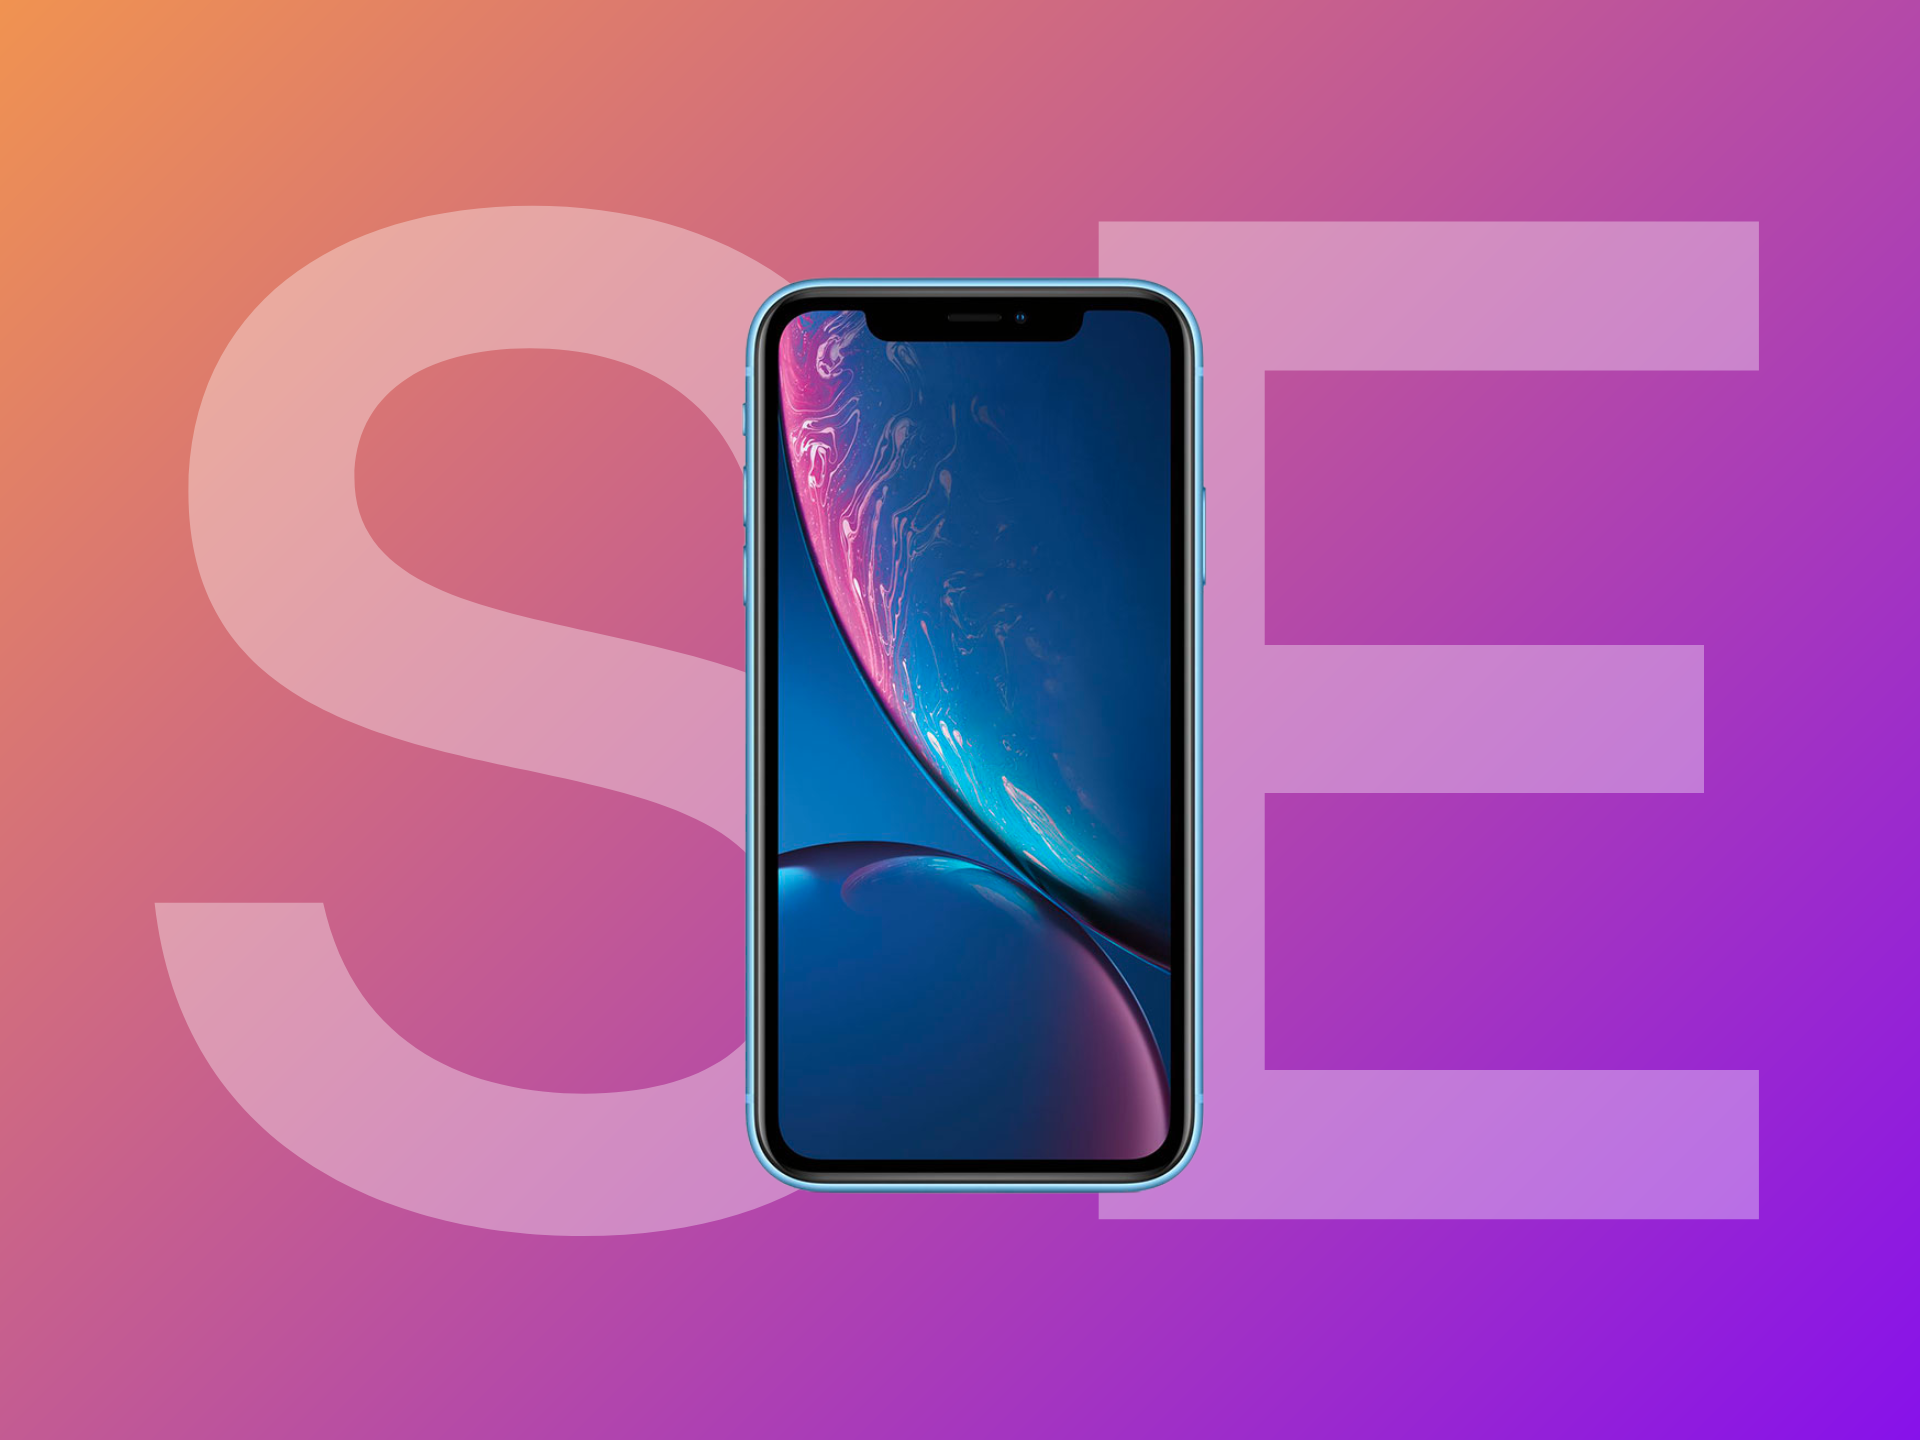 iPhone XR on an orange, purple gradient background with the SE text